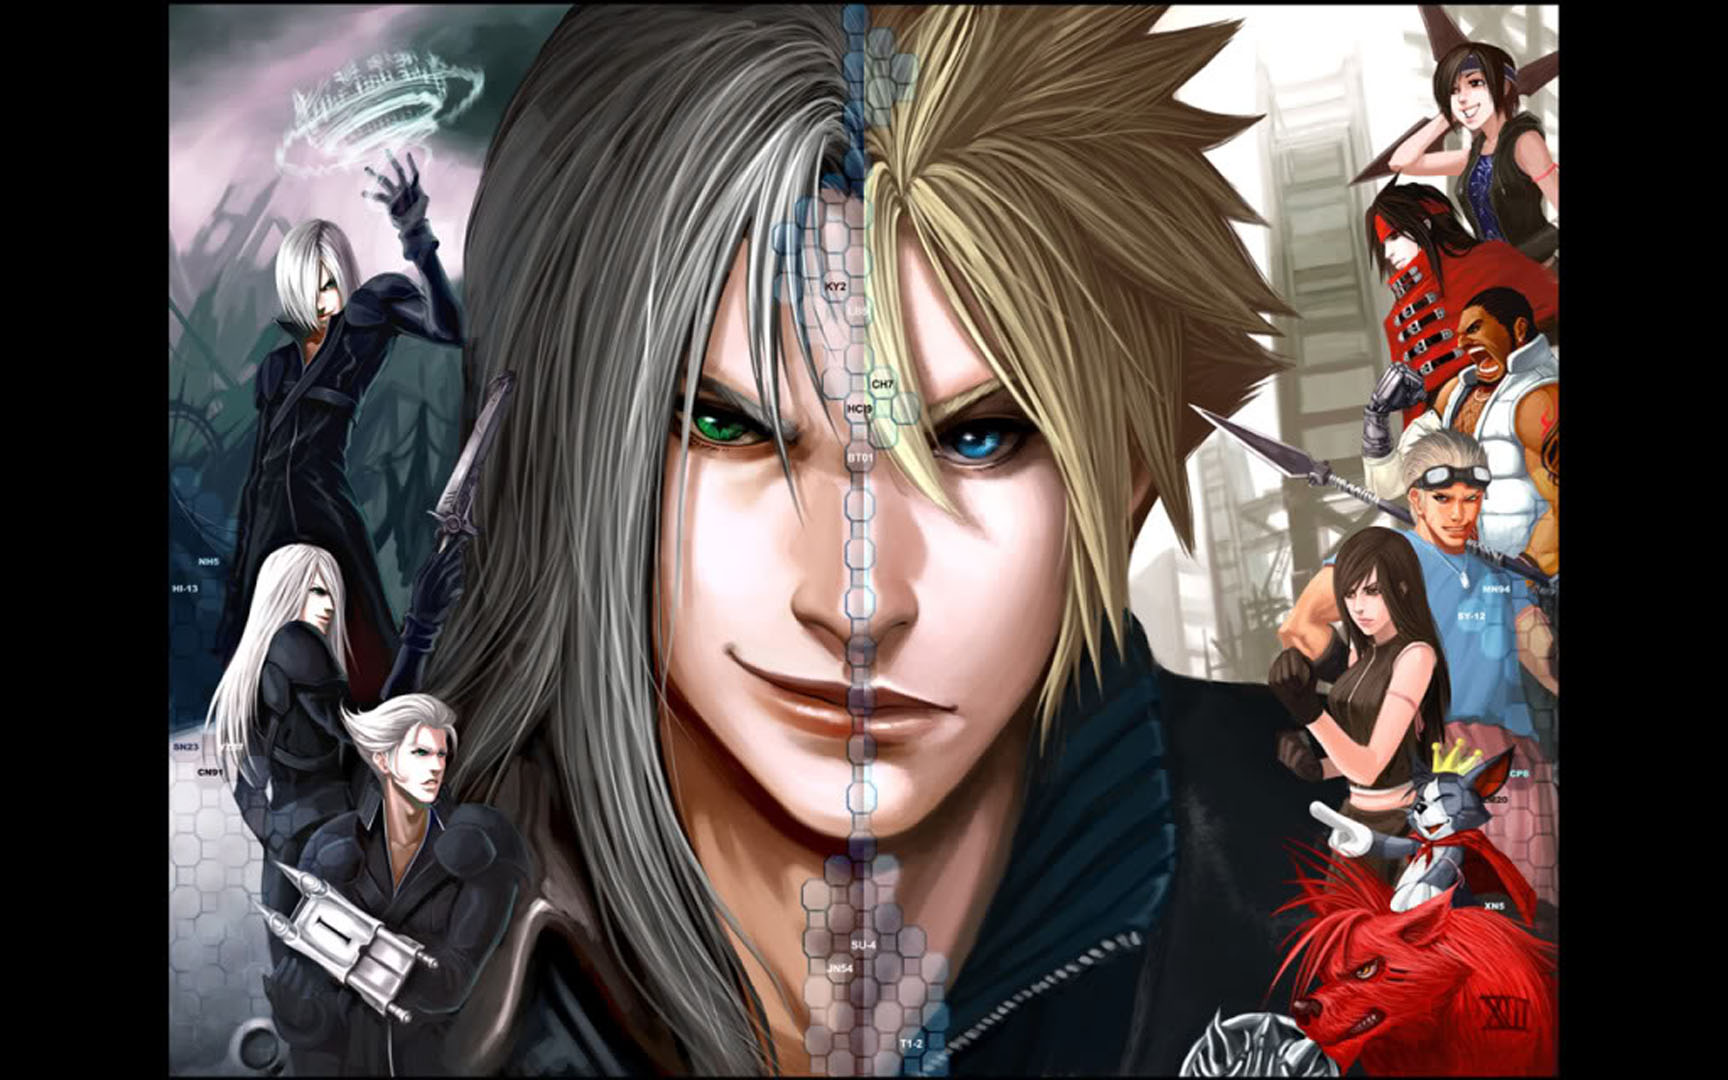 Sephiroth And Cloud Separated At Birth - Anime Final Fantasy 7 - HD Wallpaper 